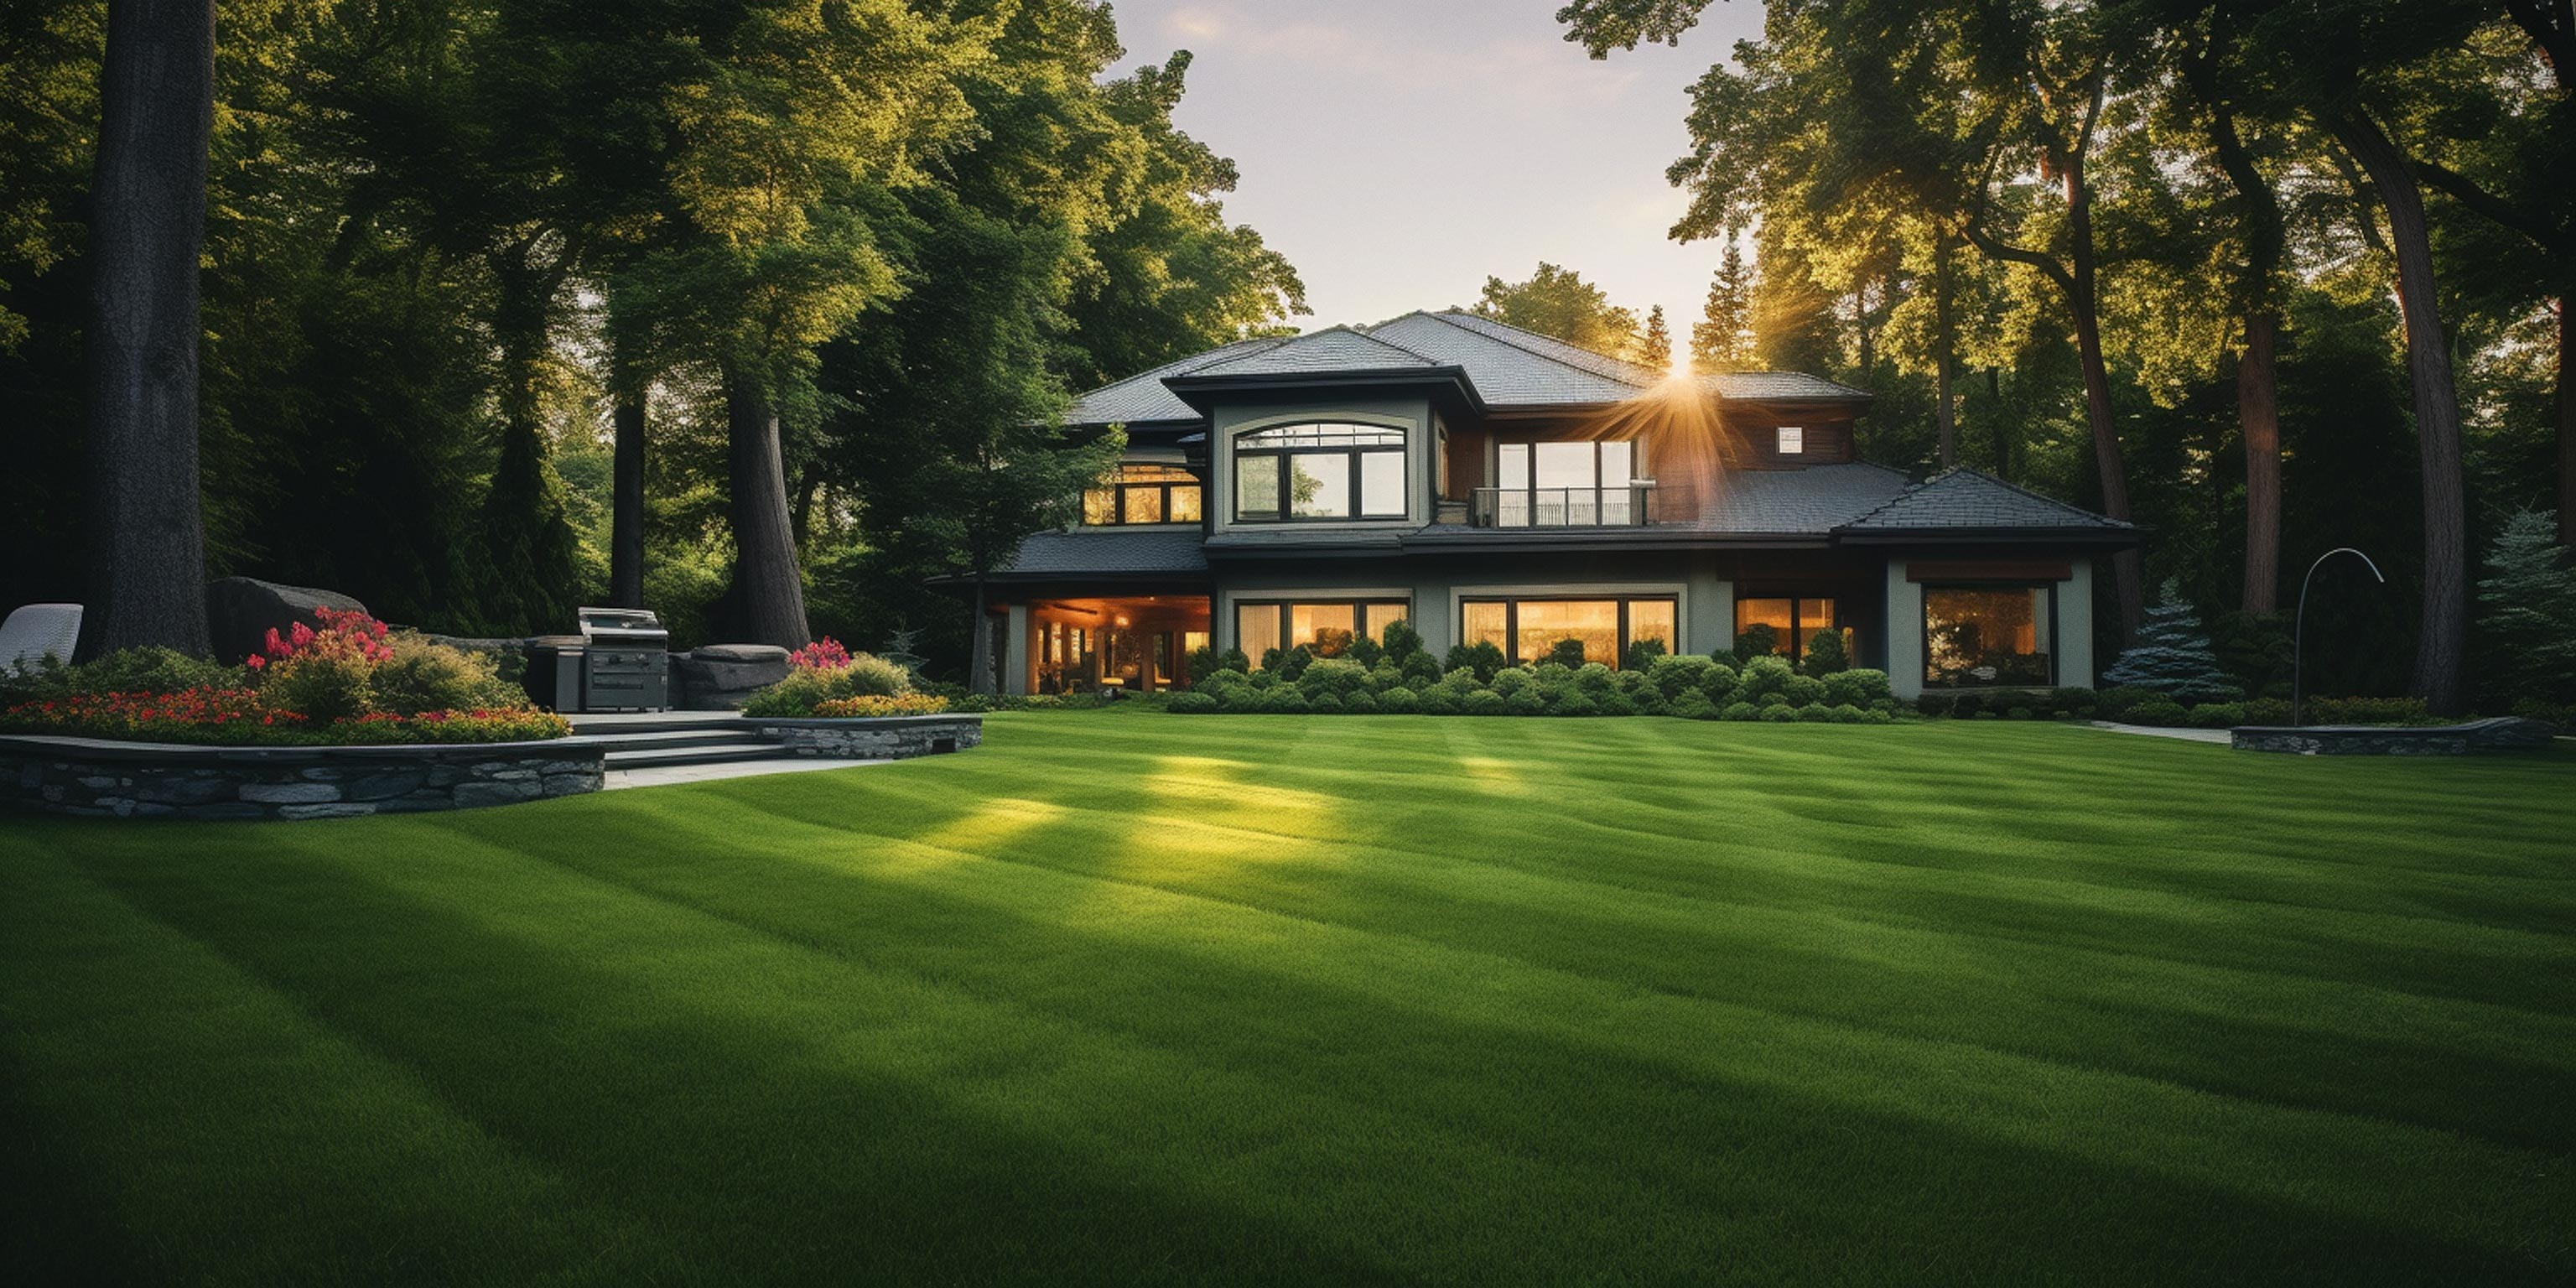 10 Essential Tips for Achieving a Lush Green Lawn All Year Round